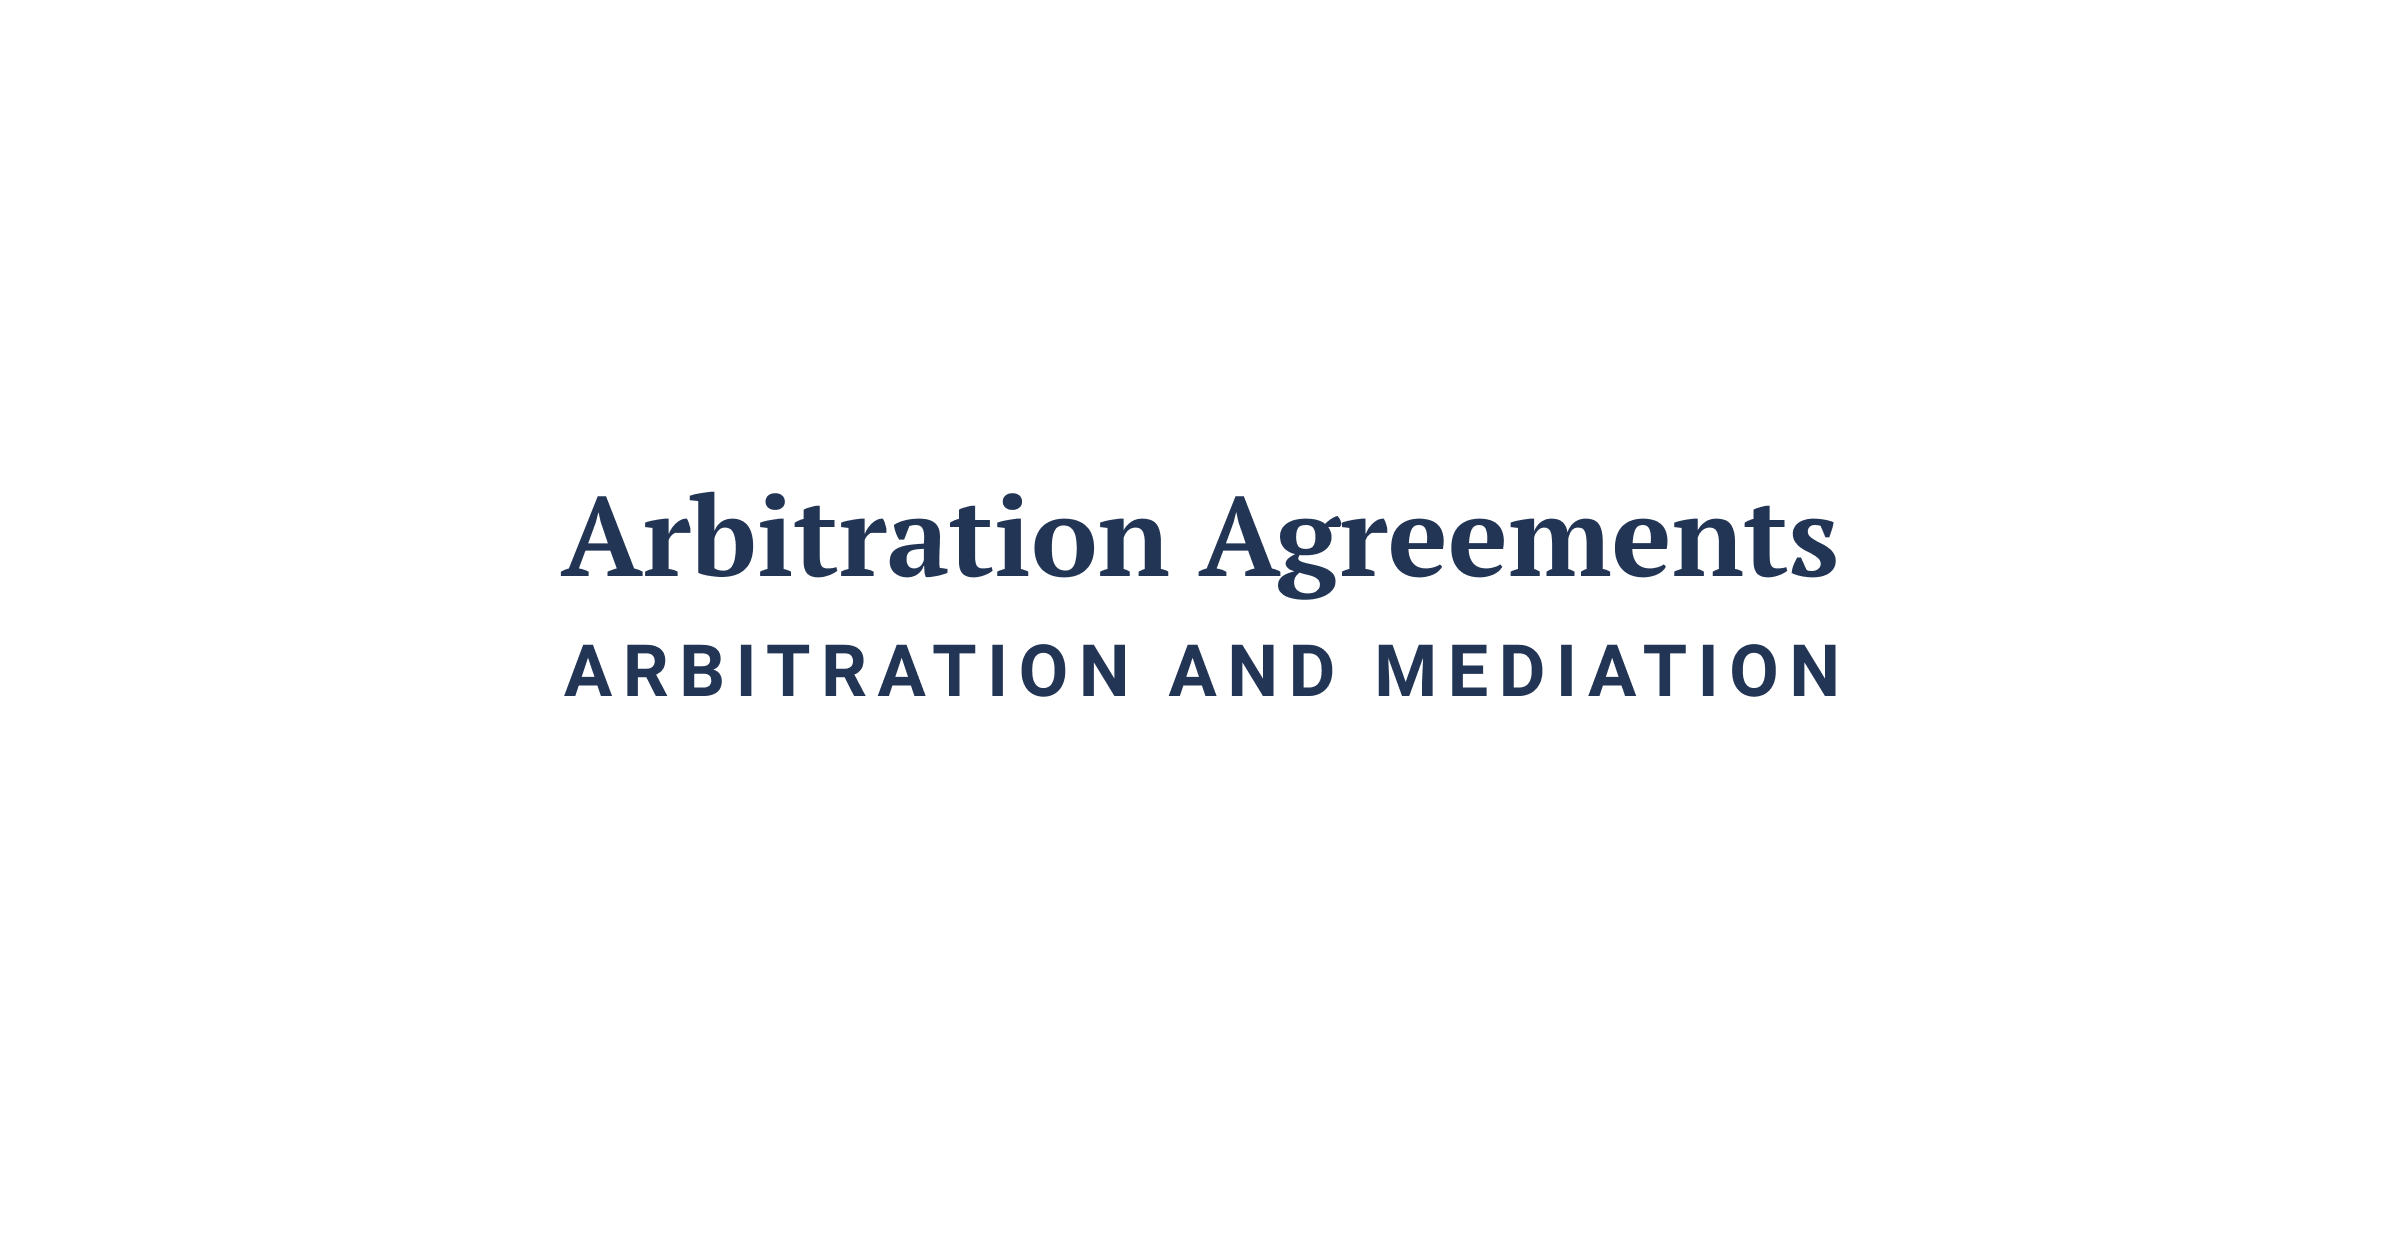 Arbitration Company product image reference 4